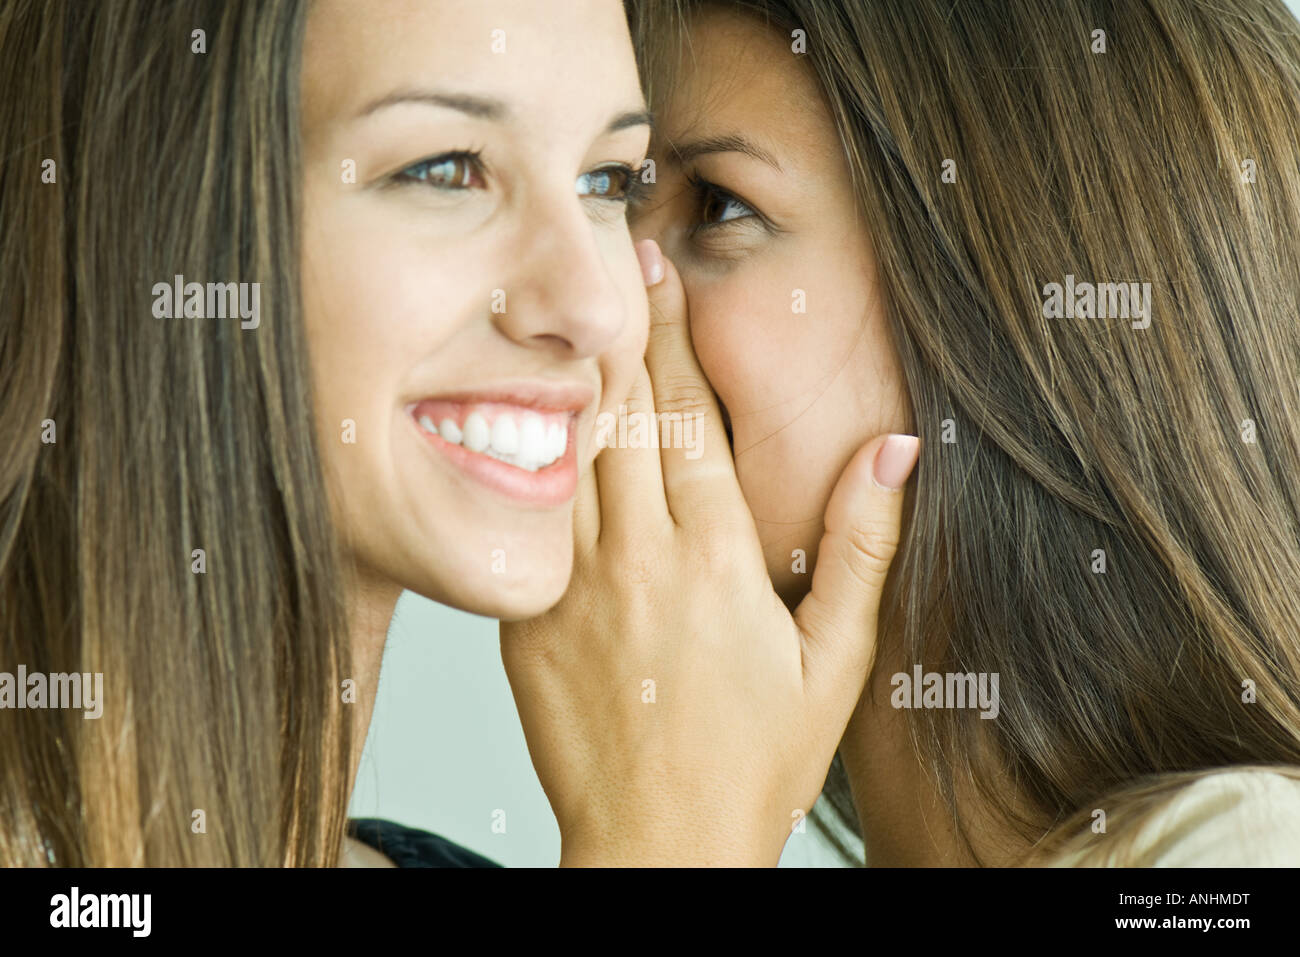 Teenage girl whispering in twin sister's ear, close-up Stock Photo